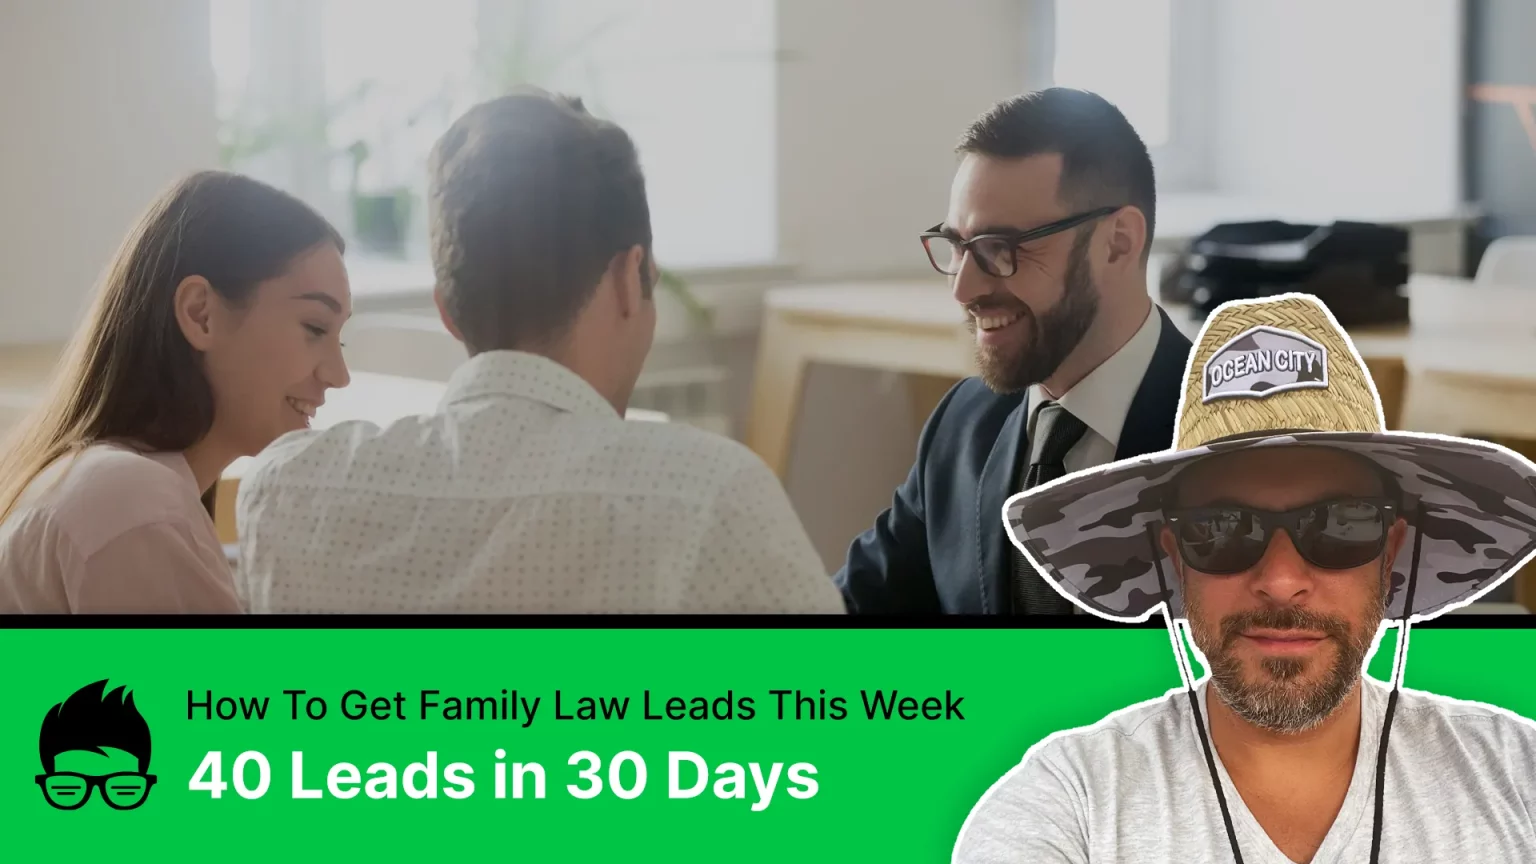 Google Ads Case Study - Family Law PPC Ads